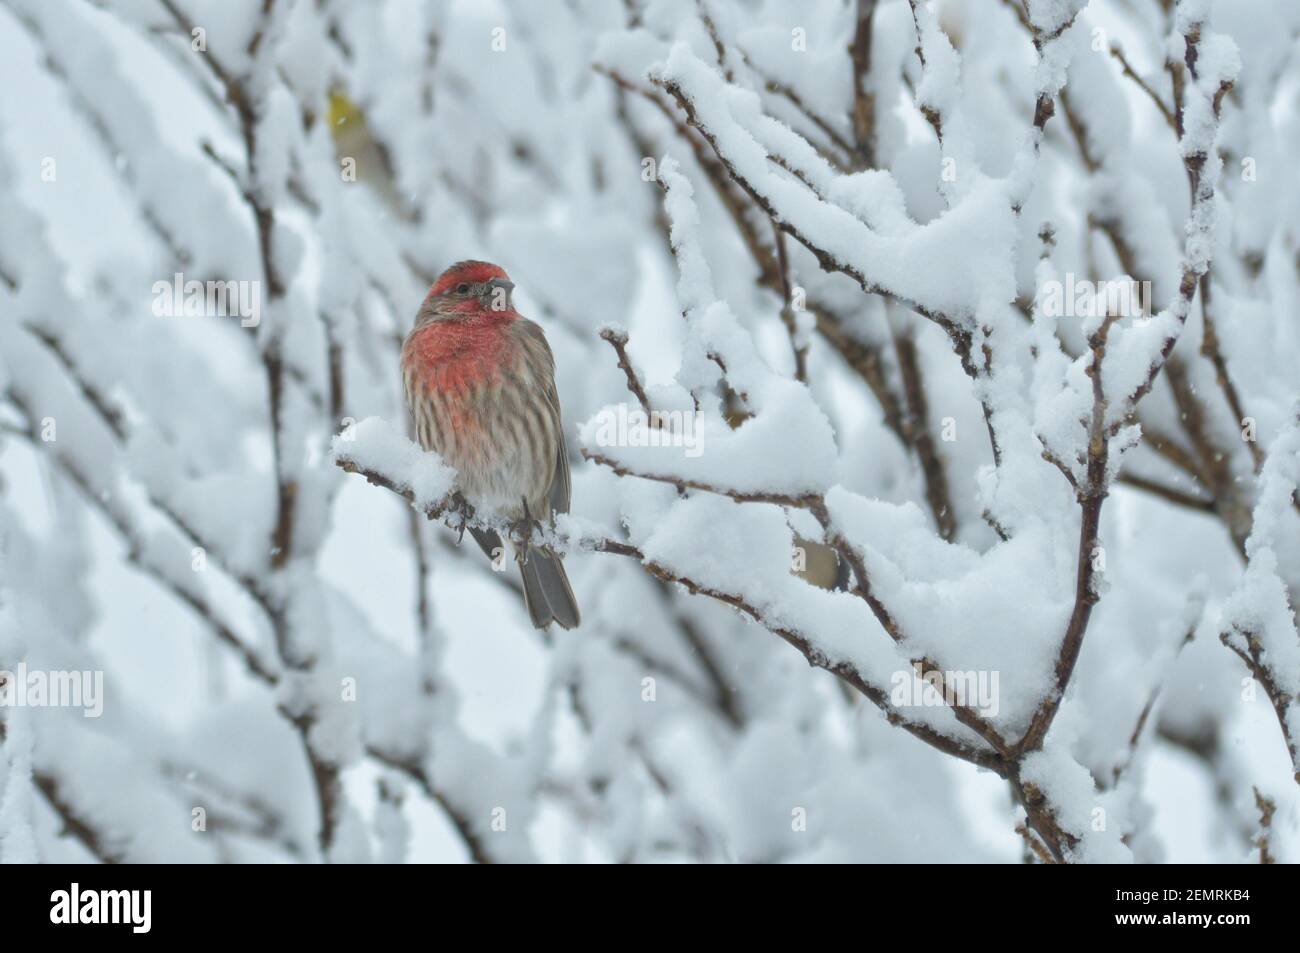 Male House Finch in a snow covered bush in winter Stock Photo